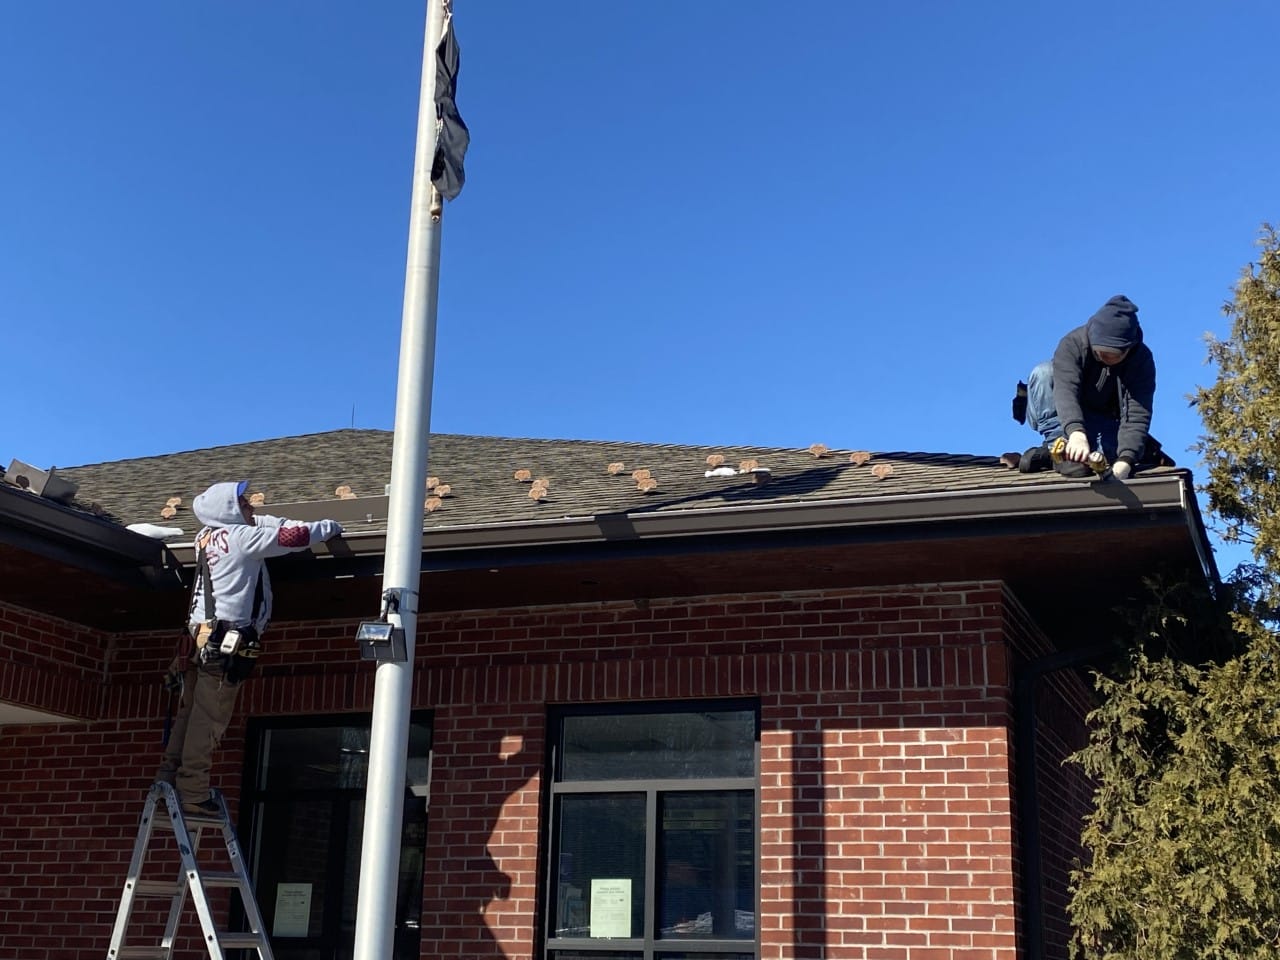 New Gutter Installation at the Sloatsburg Post Office